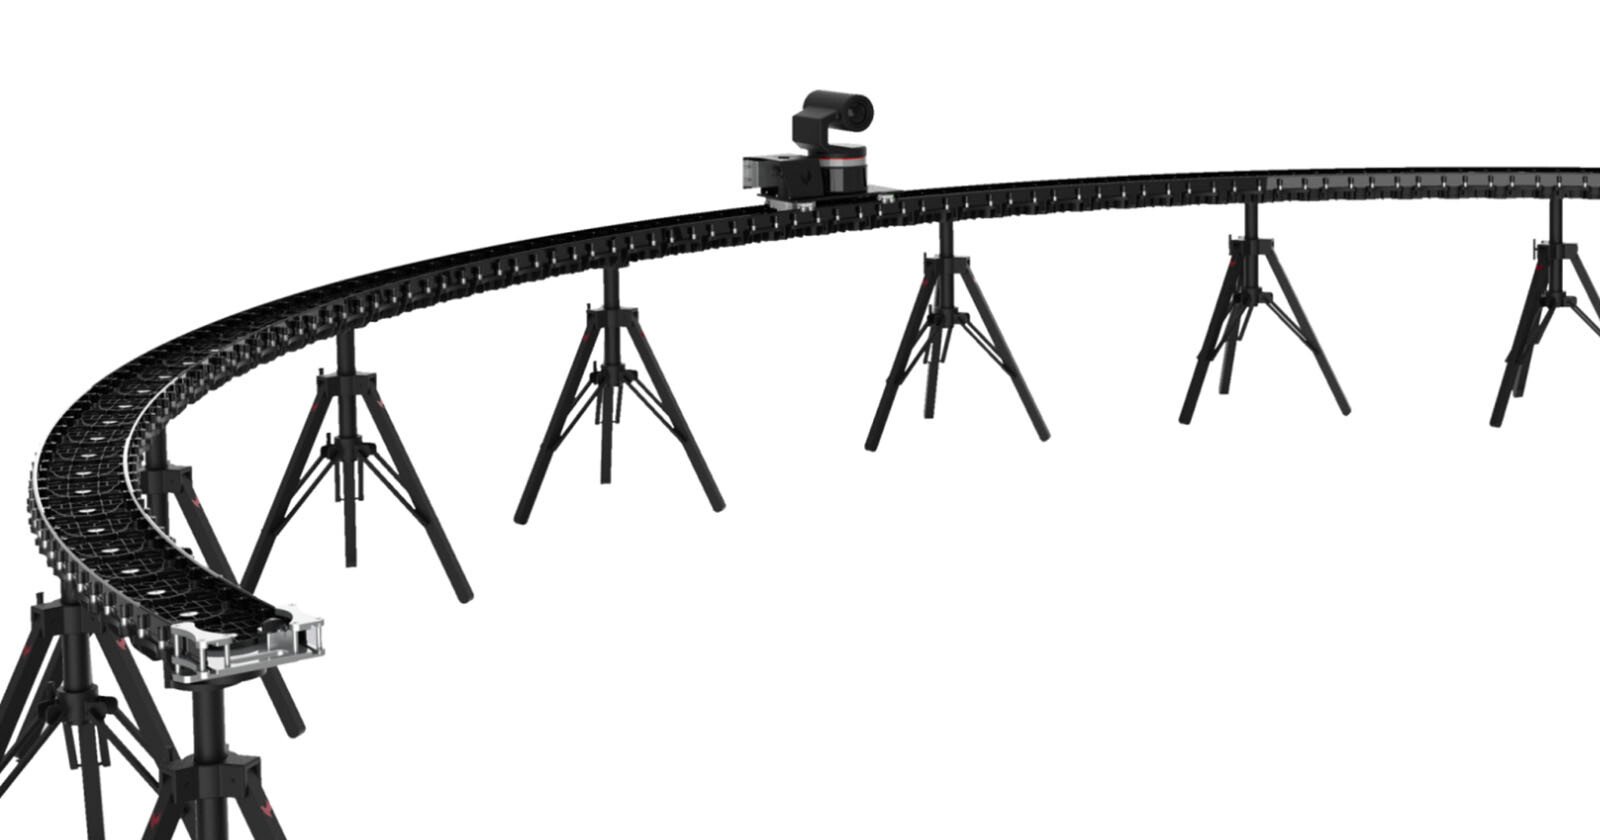 The PanaTrack is an Giant Bendable Camera Slider System